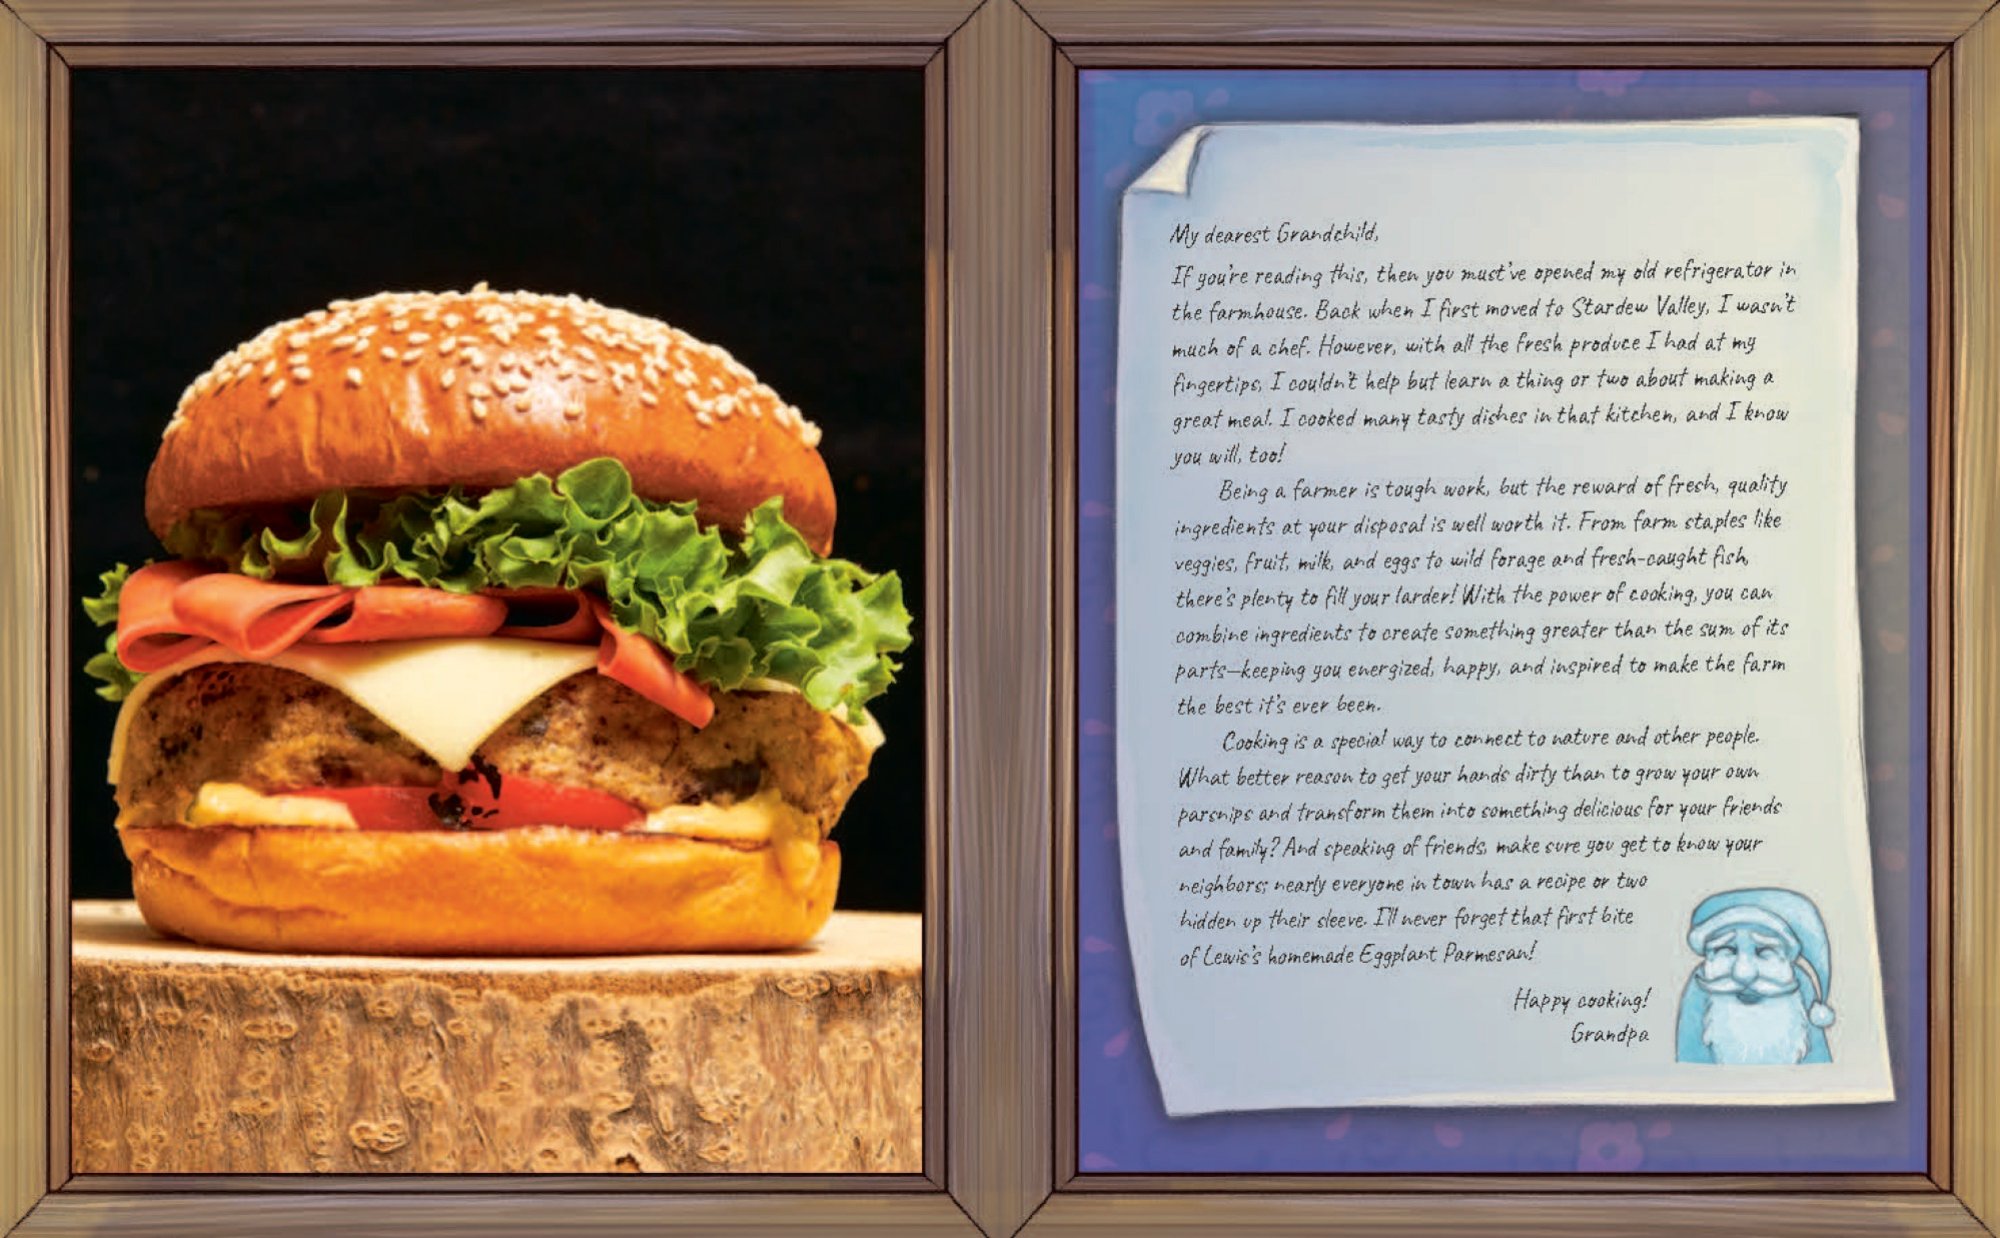 An image from The Official Stardew Valley Cookbook showing a burger and a letter from your grandfather in the game.